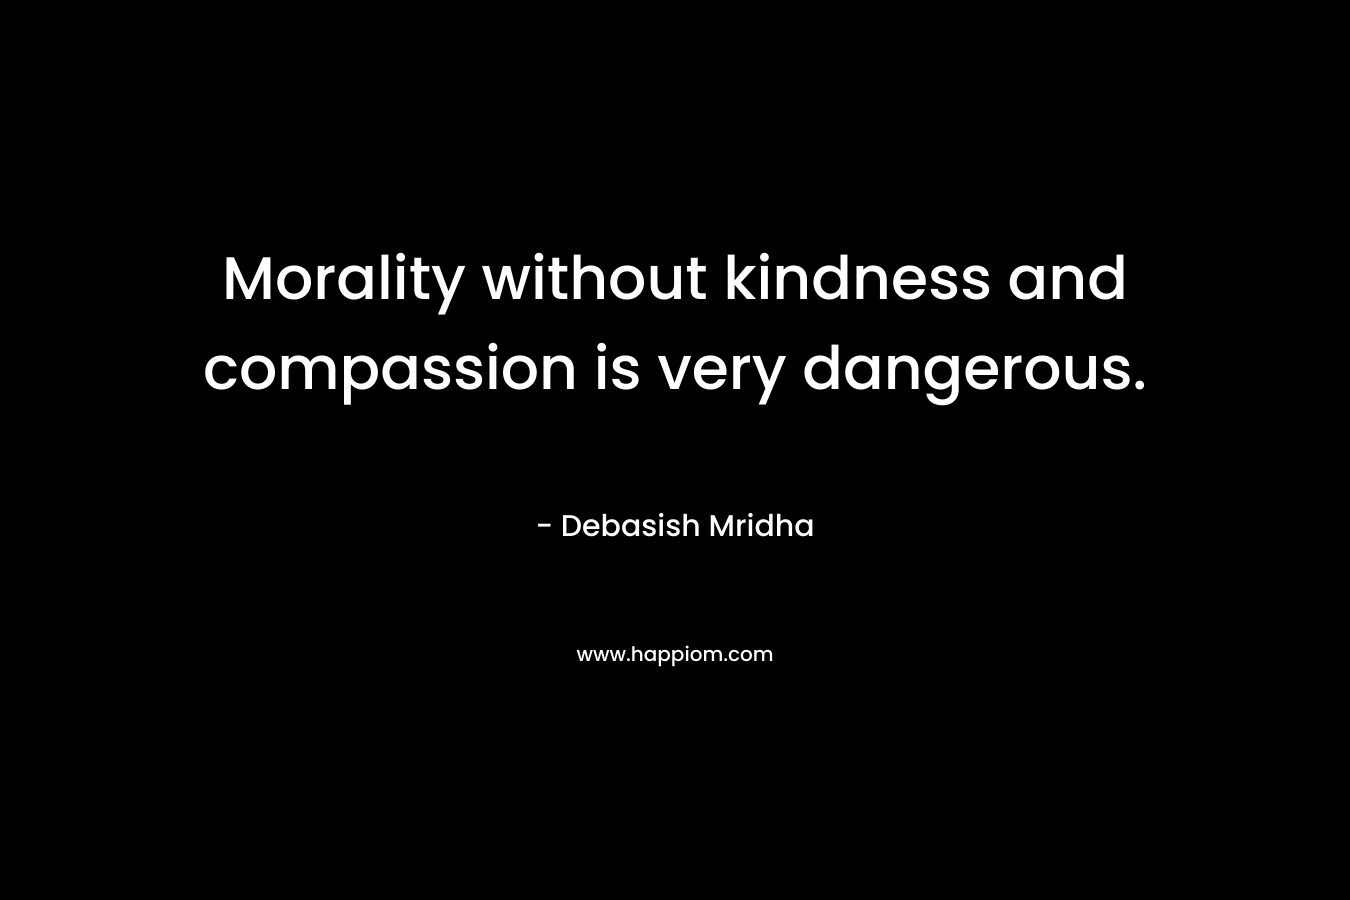 Morality without kindness and compassion is very dangerous.